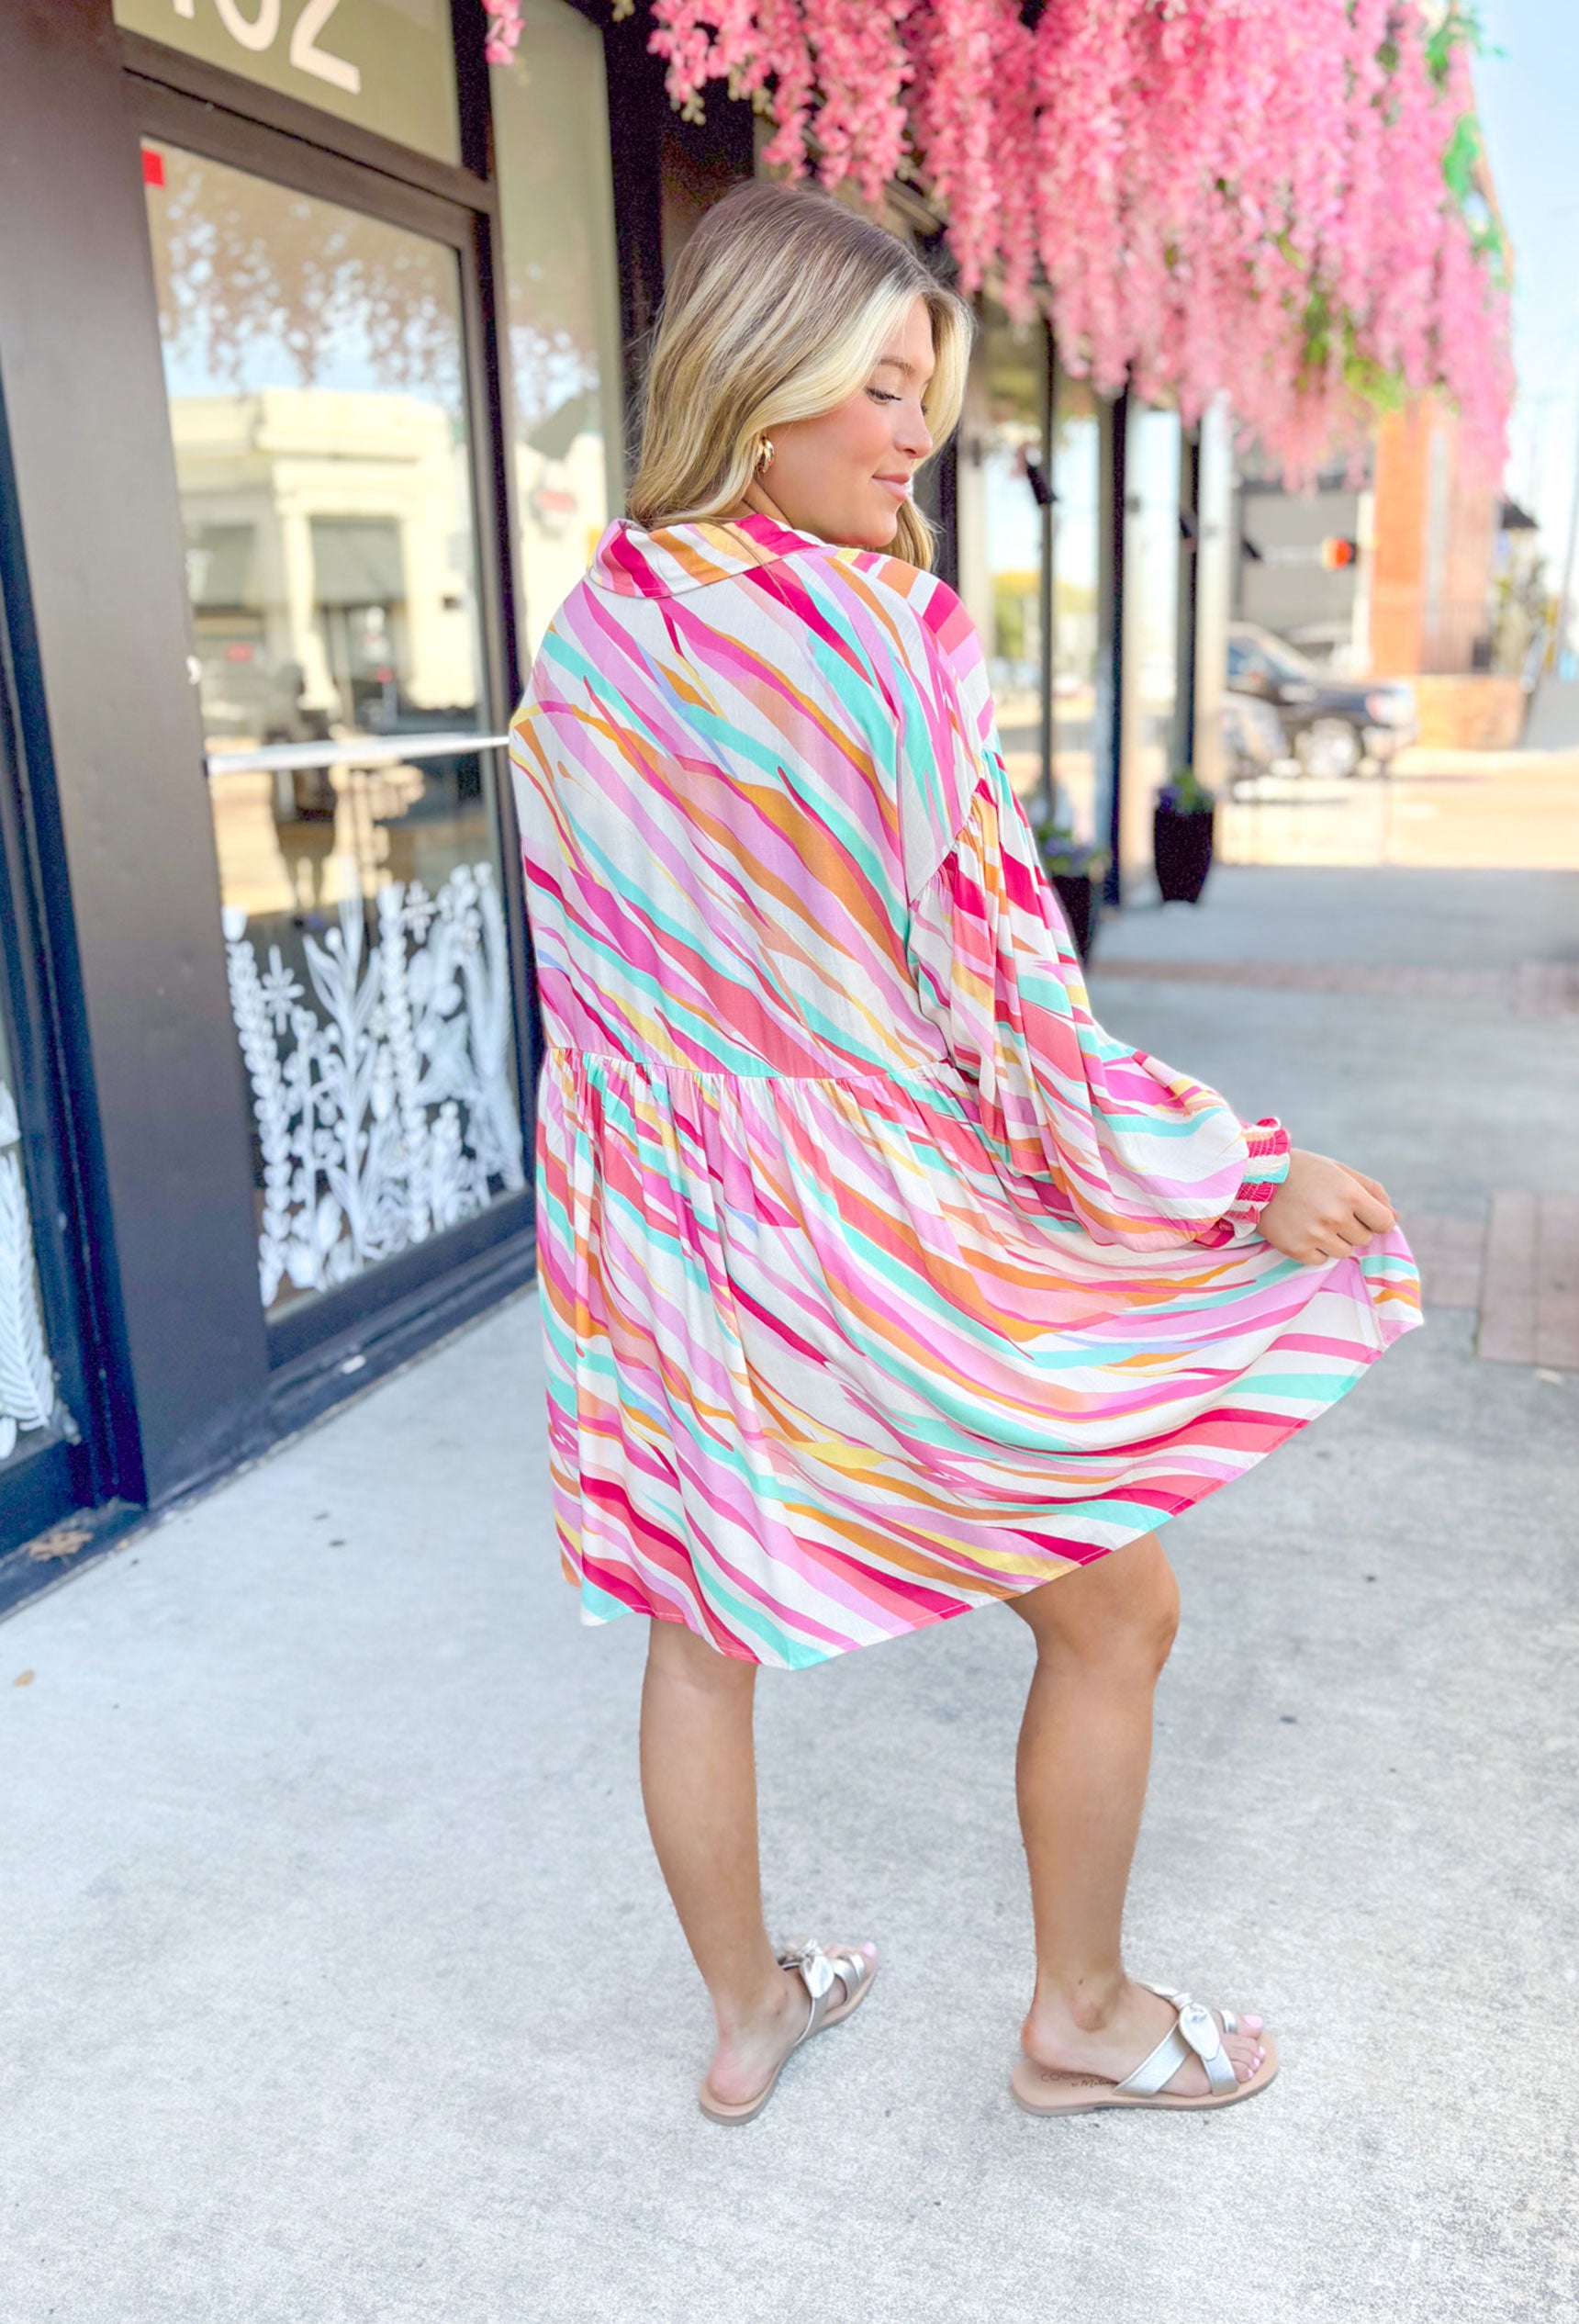 No Looking Back Dress, zebra print long sleeve button up dress in hot pink, light pink, bubblegum pink, turquoise, orange, white, and yellow